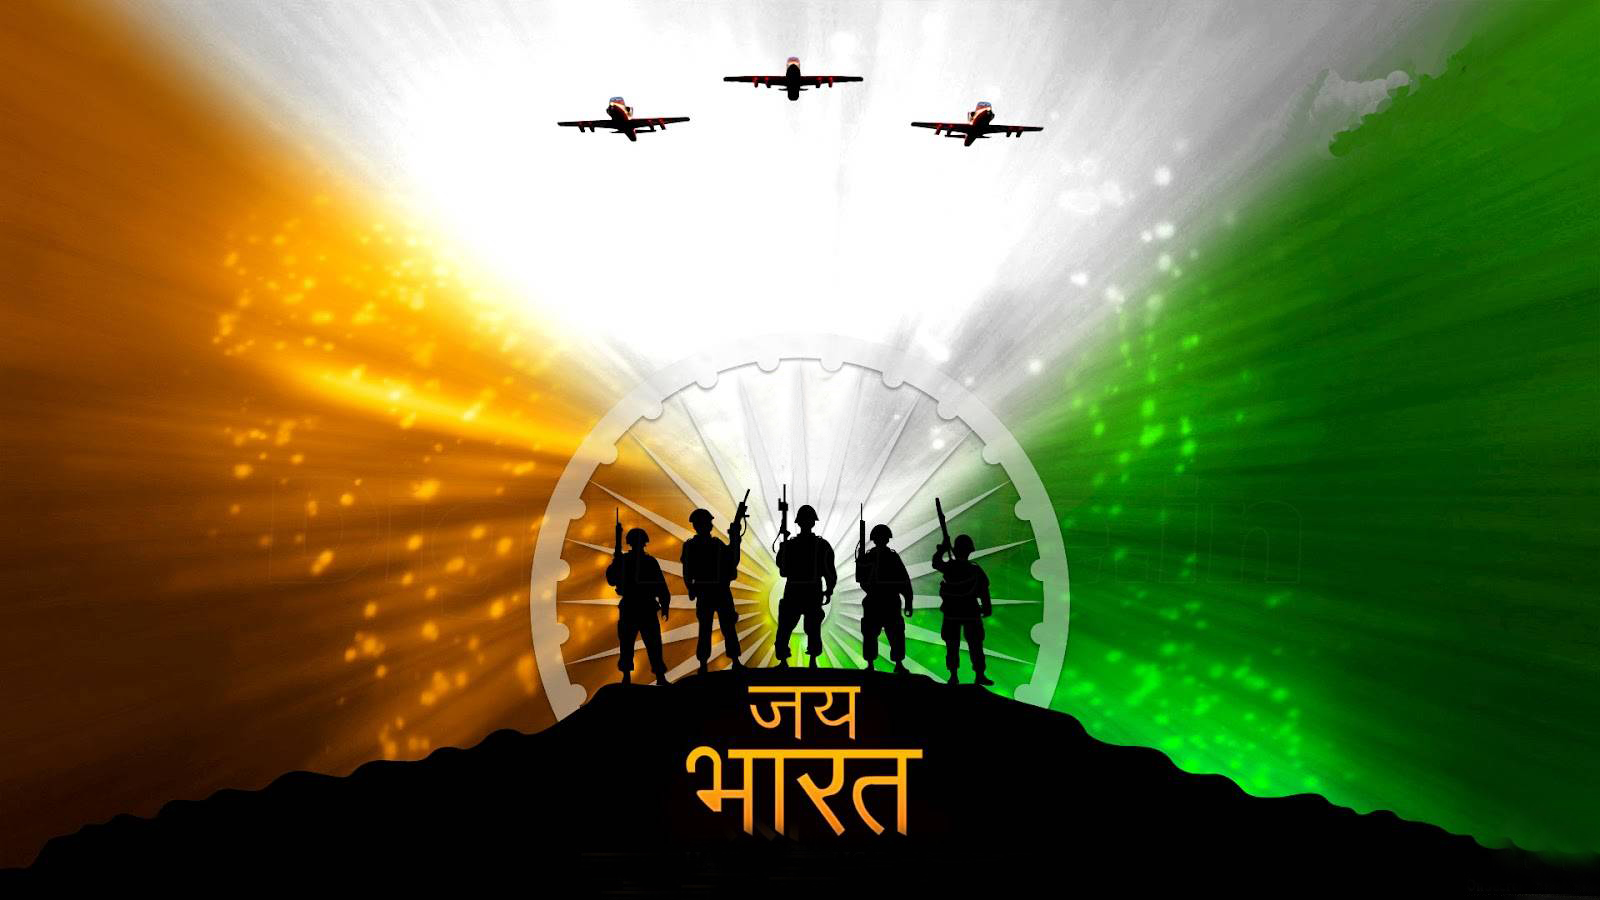 75th Independence Day Images